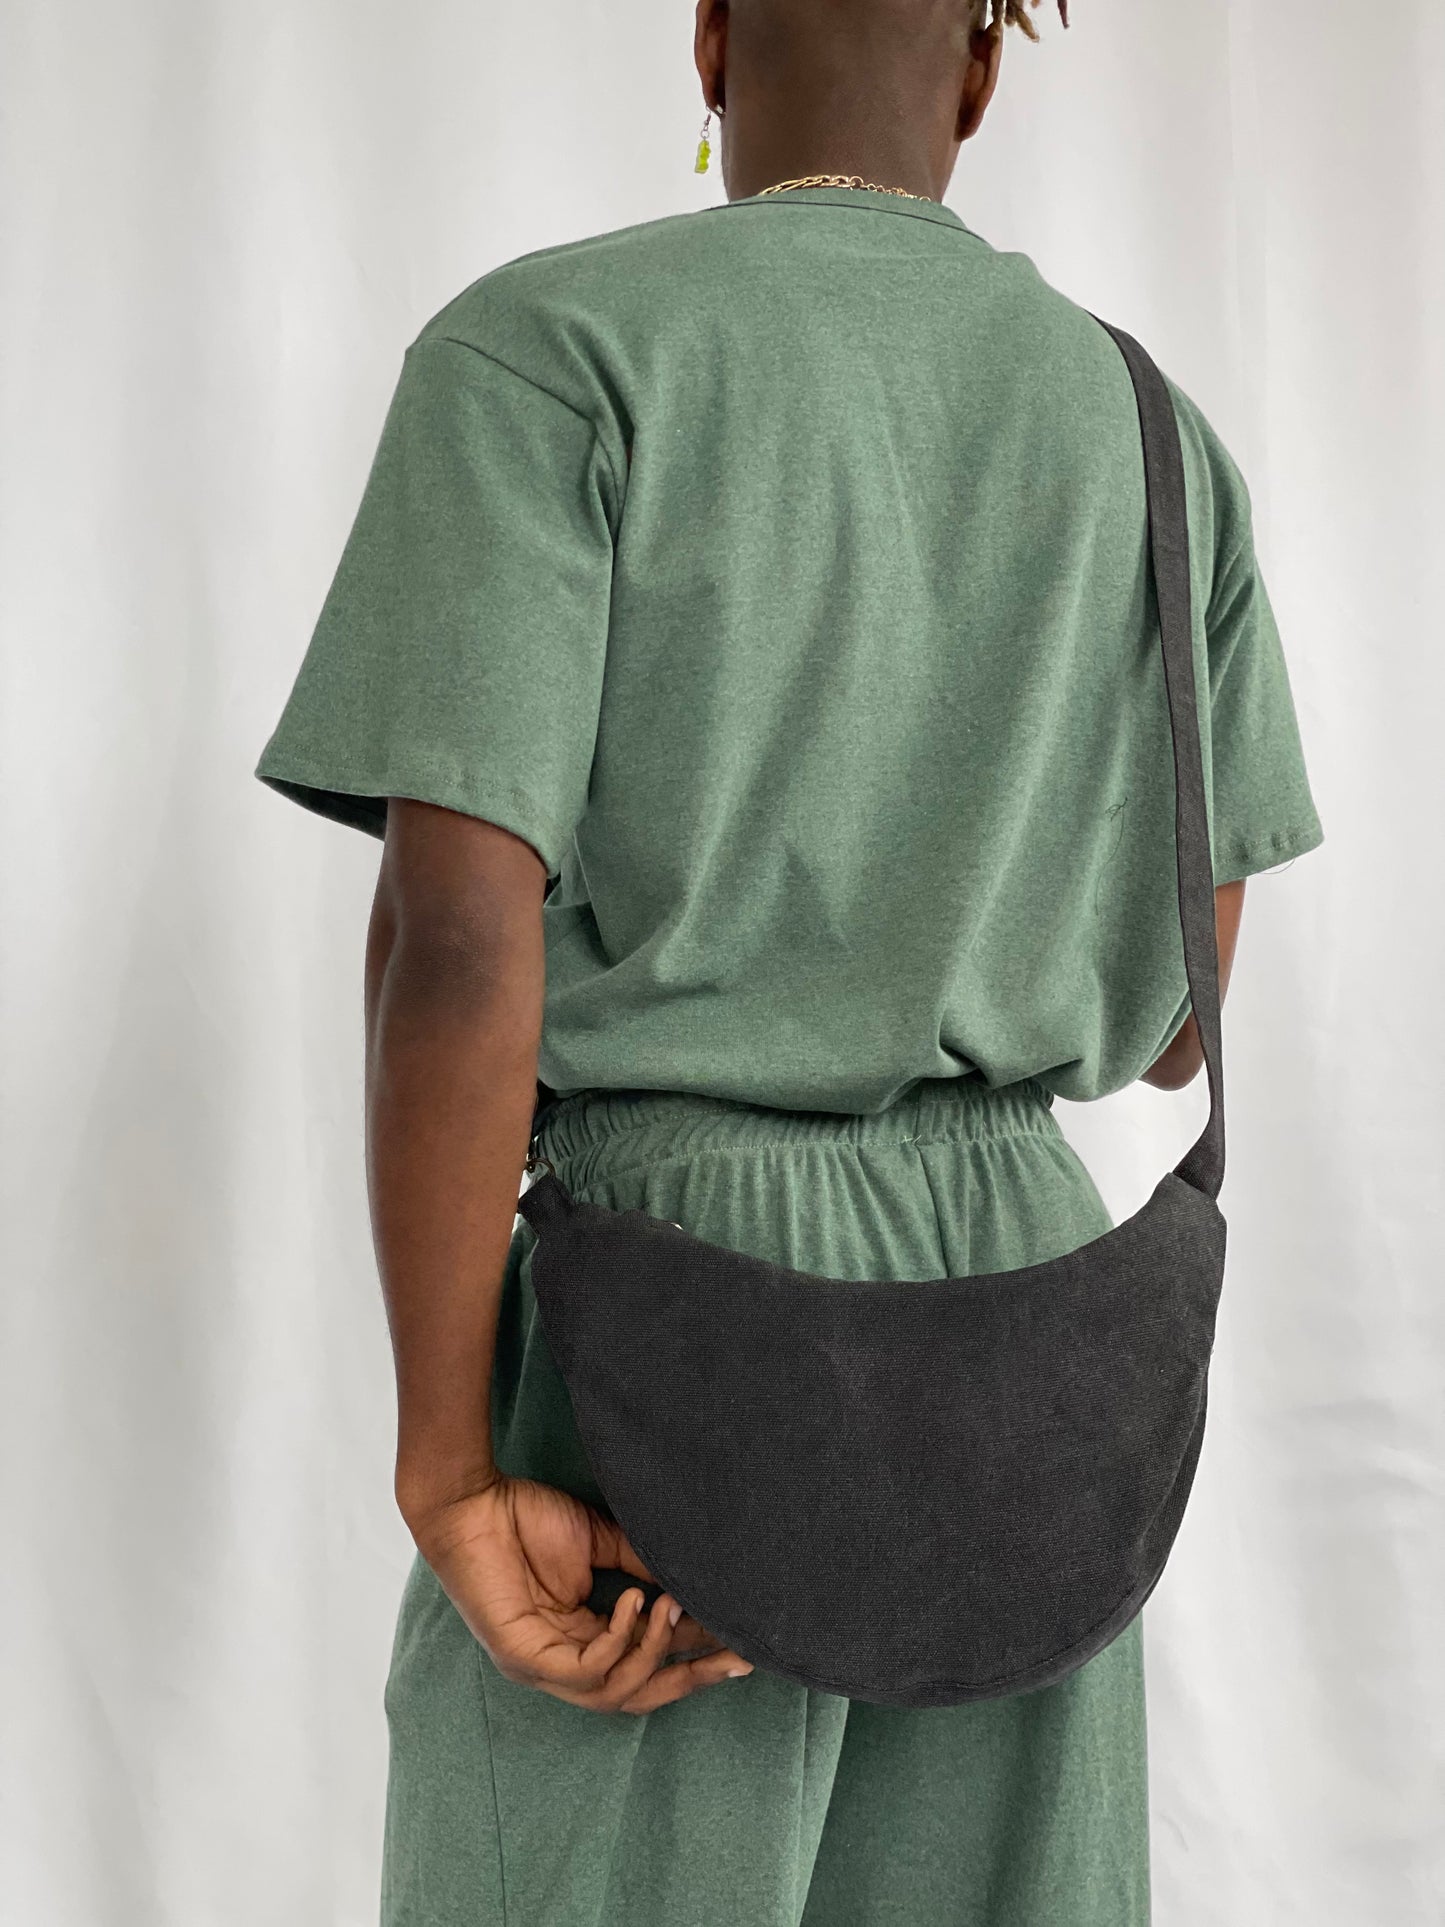 Models wears black sling bag cross body with green pants and t-shirt against a white backdrop 